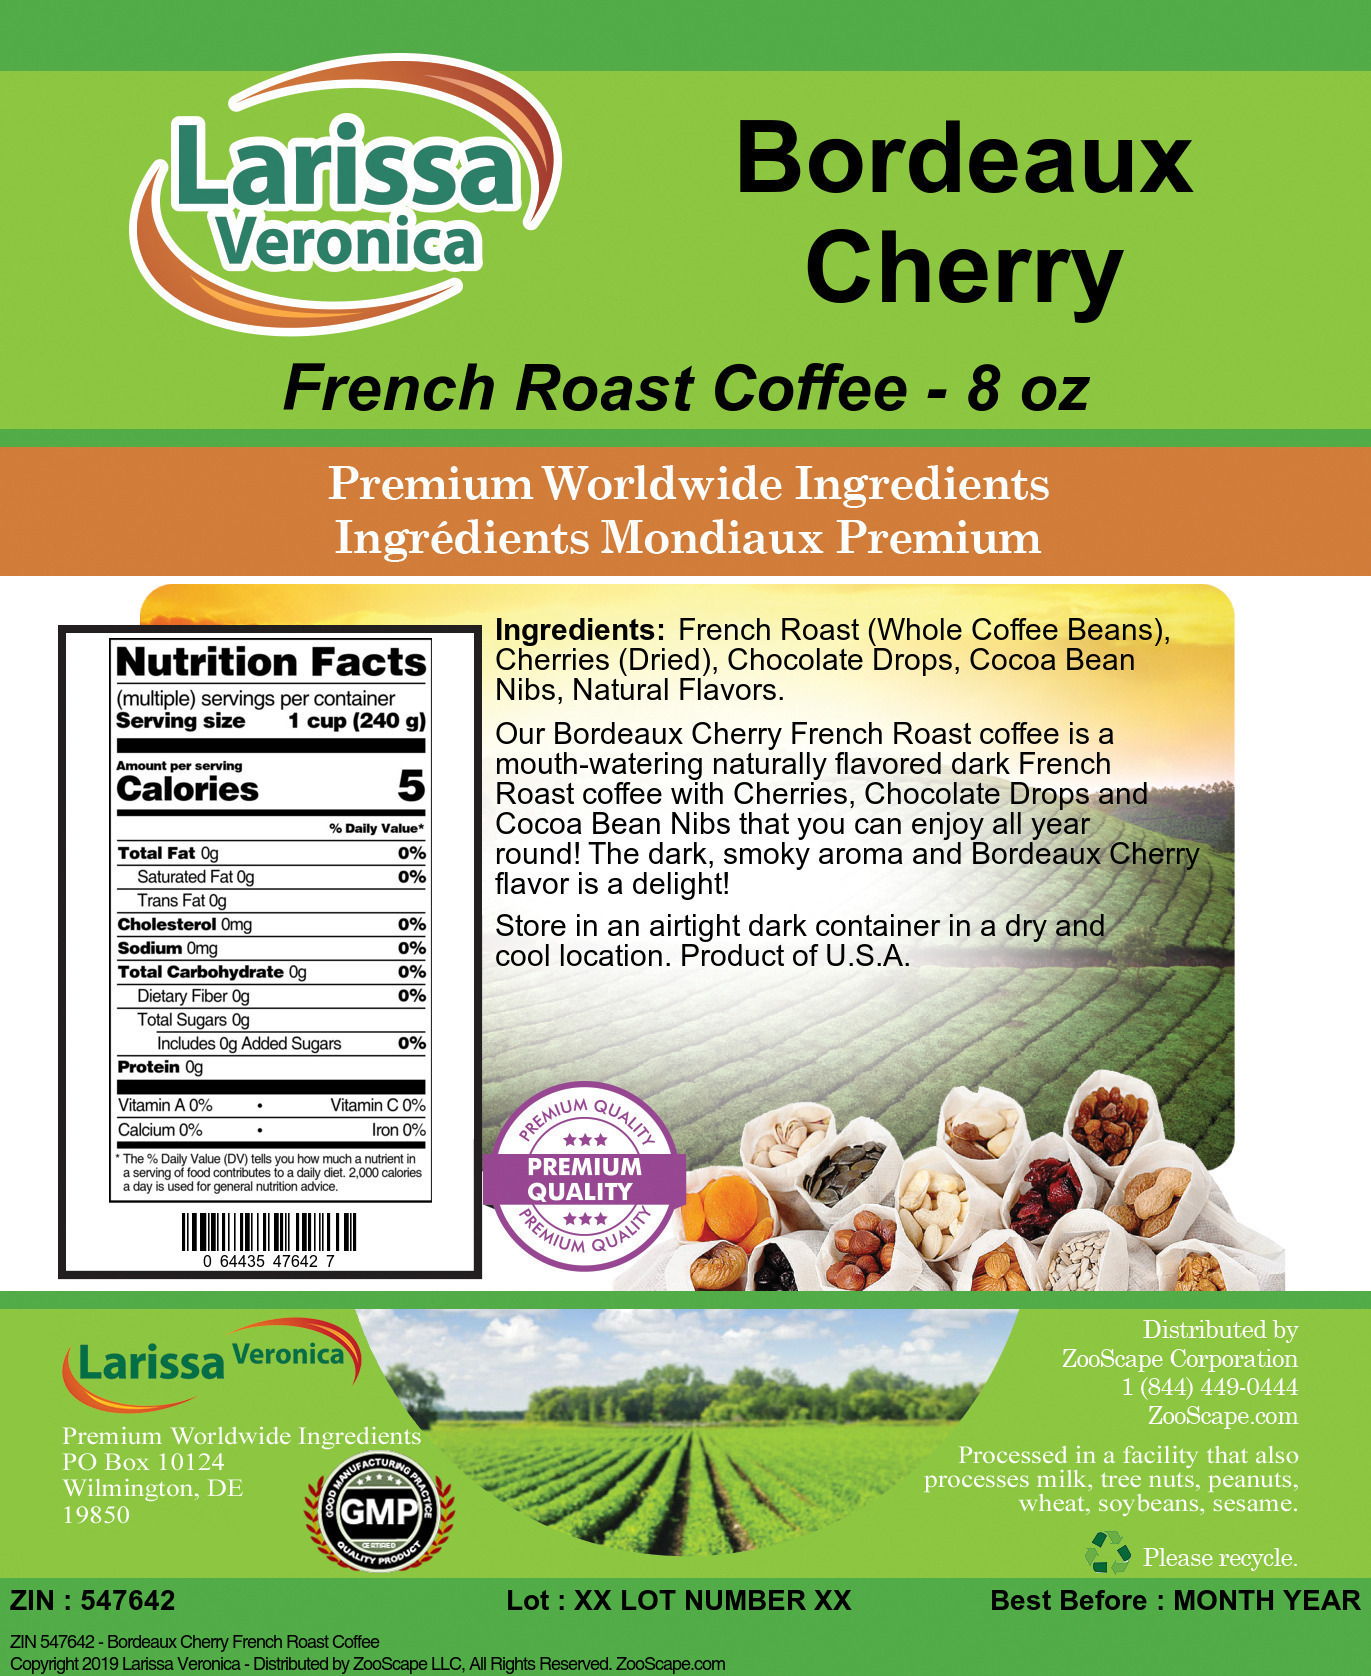 Bordeaux Cherry French Roast Coffee - Label